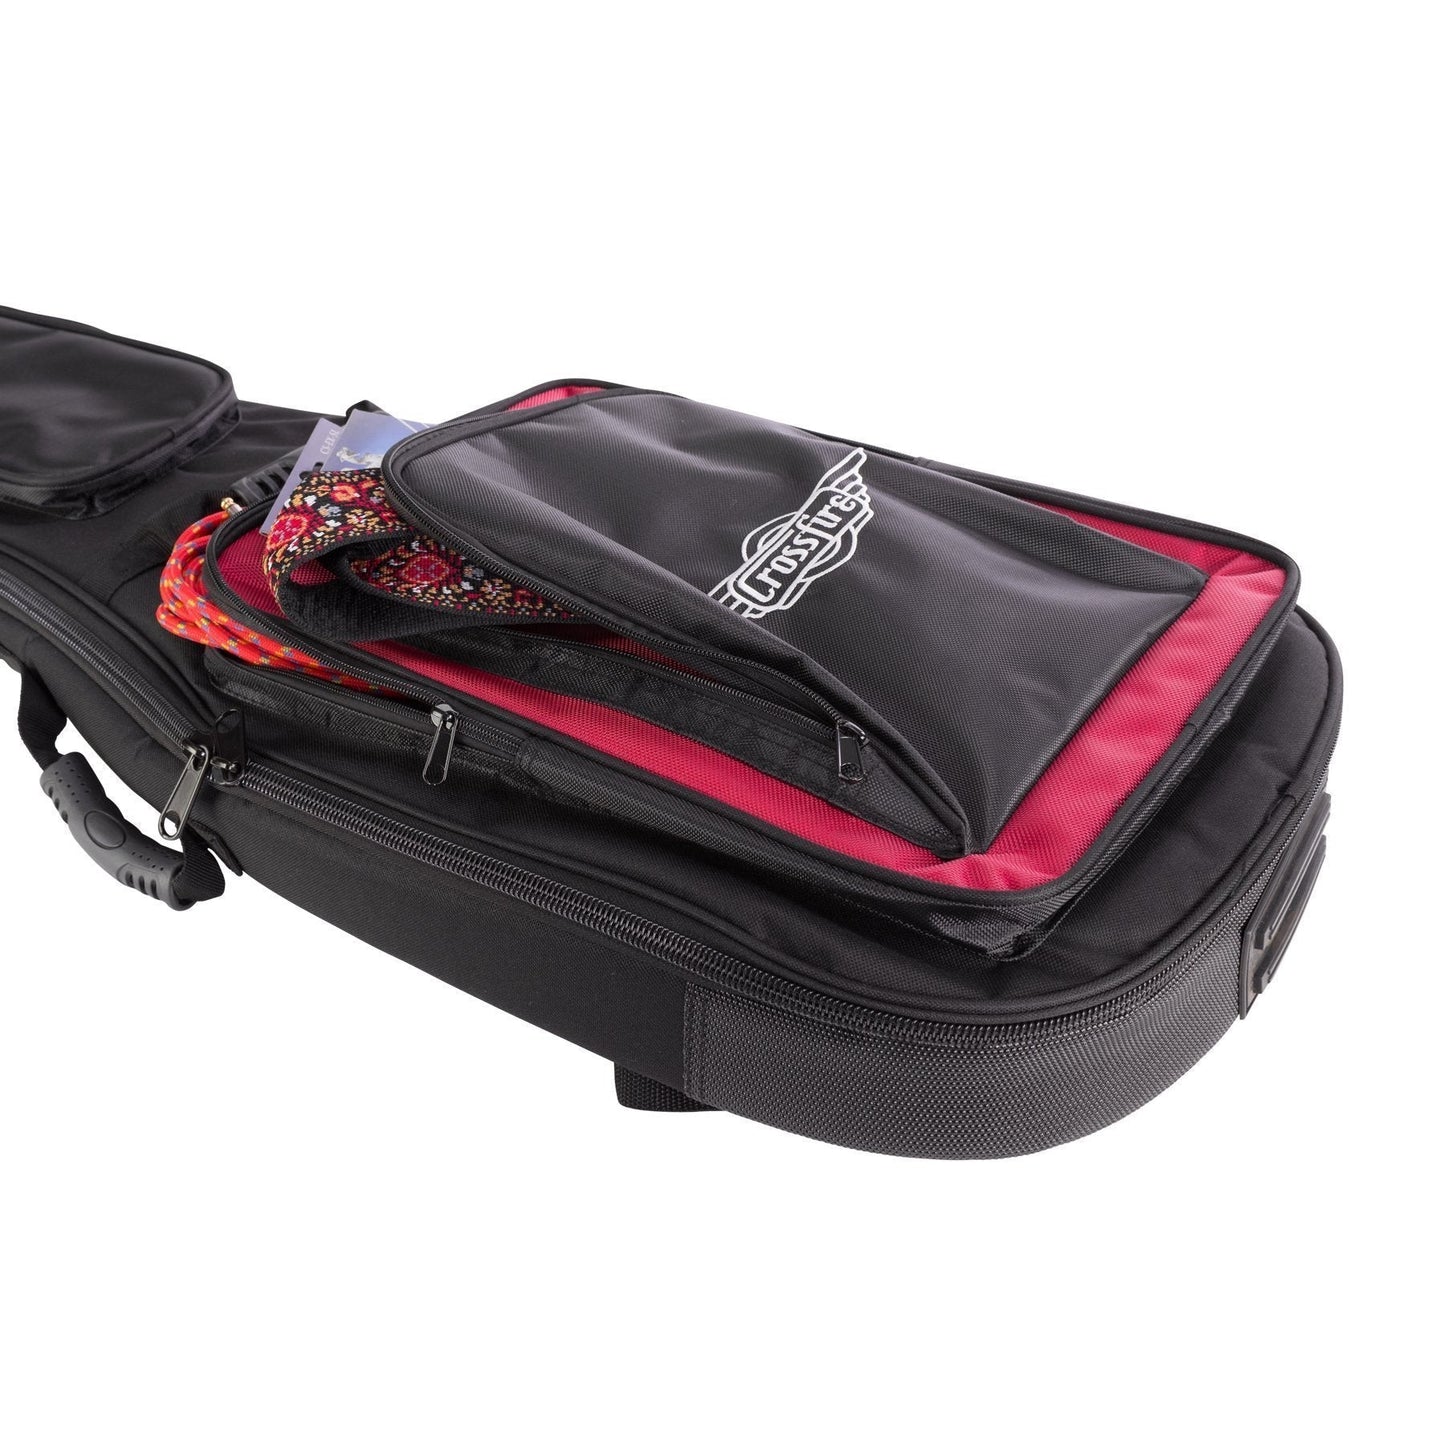 Crossfire Deluxe Padded Electric Guitar Gig Bag (Black)